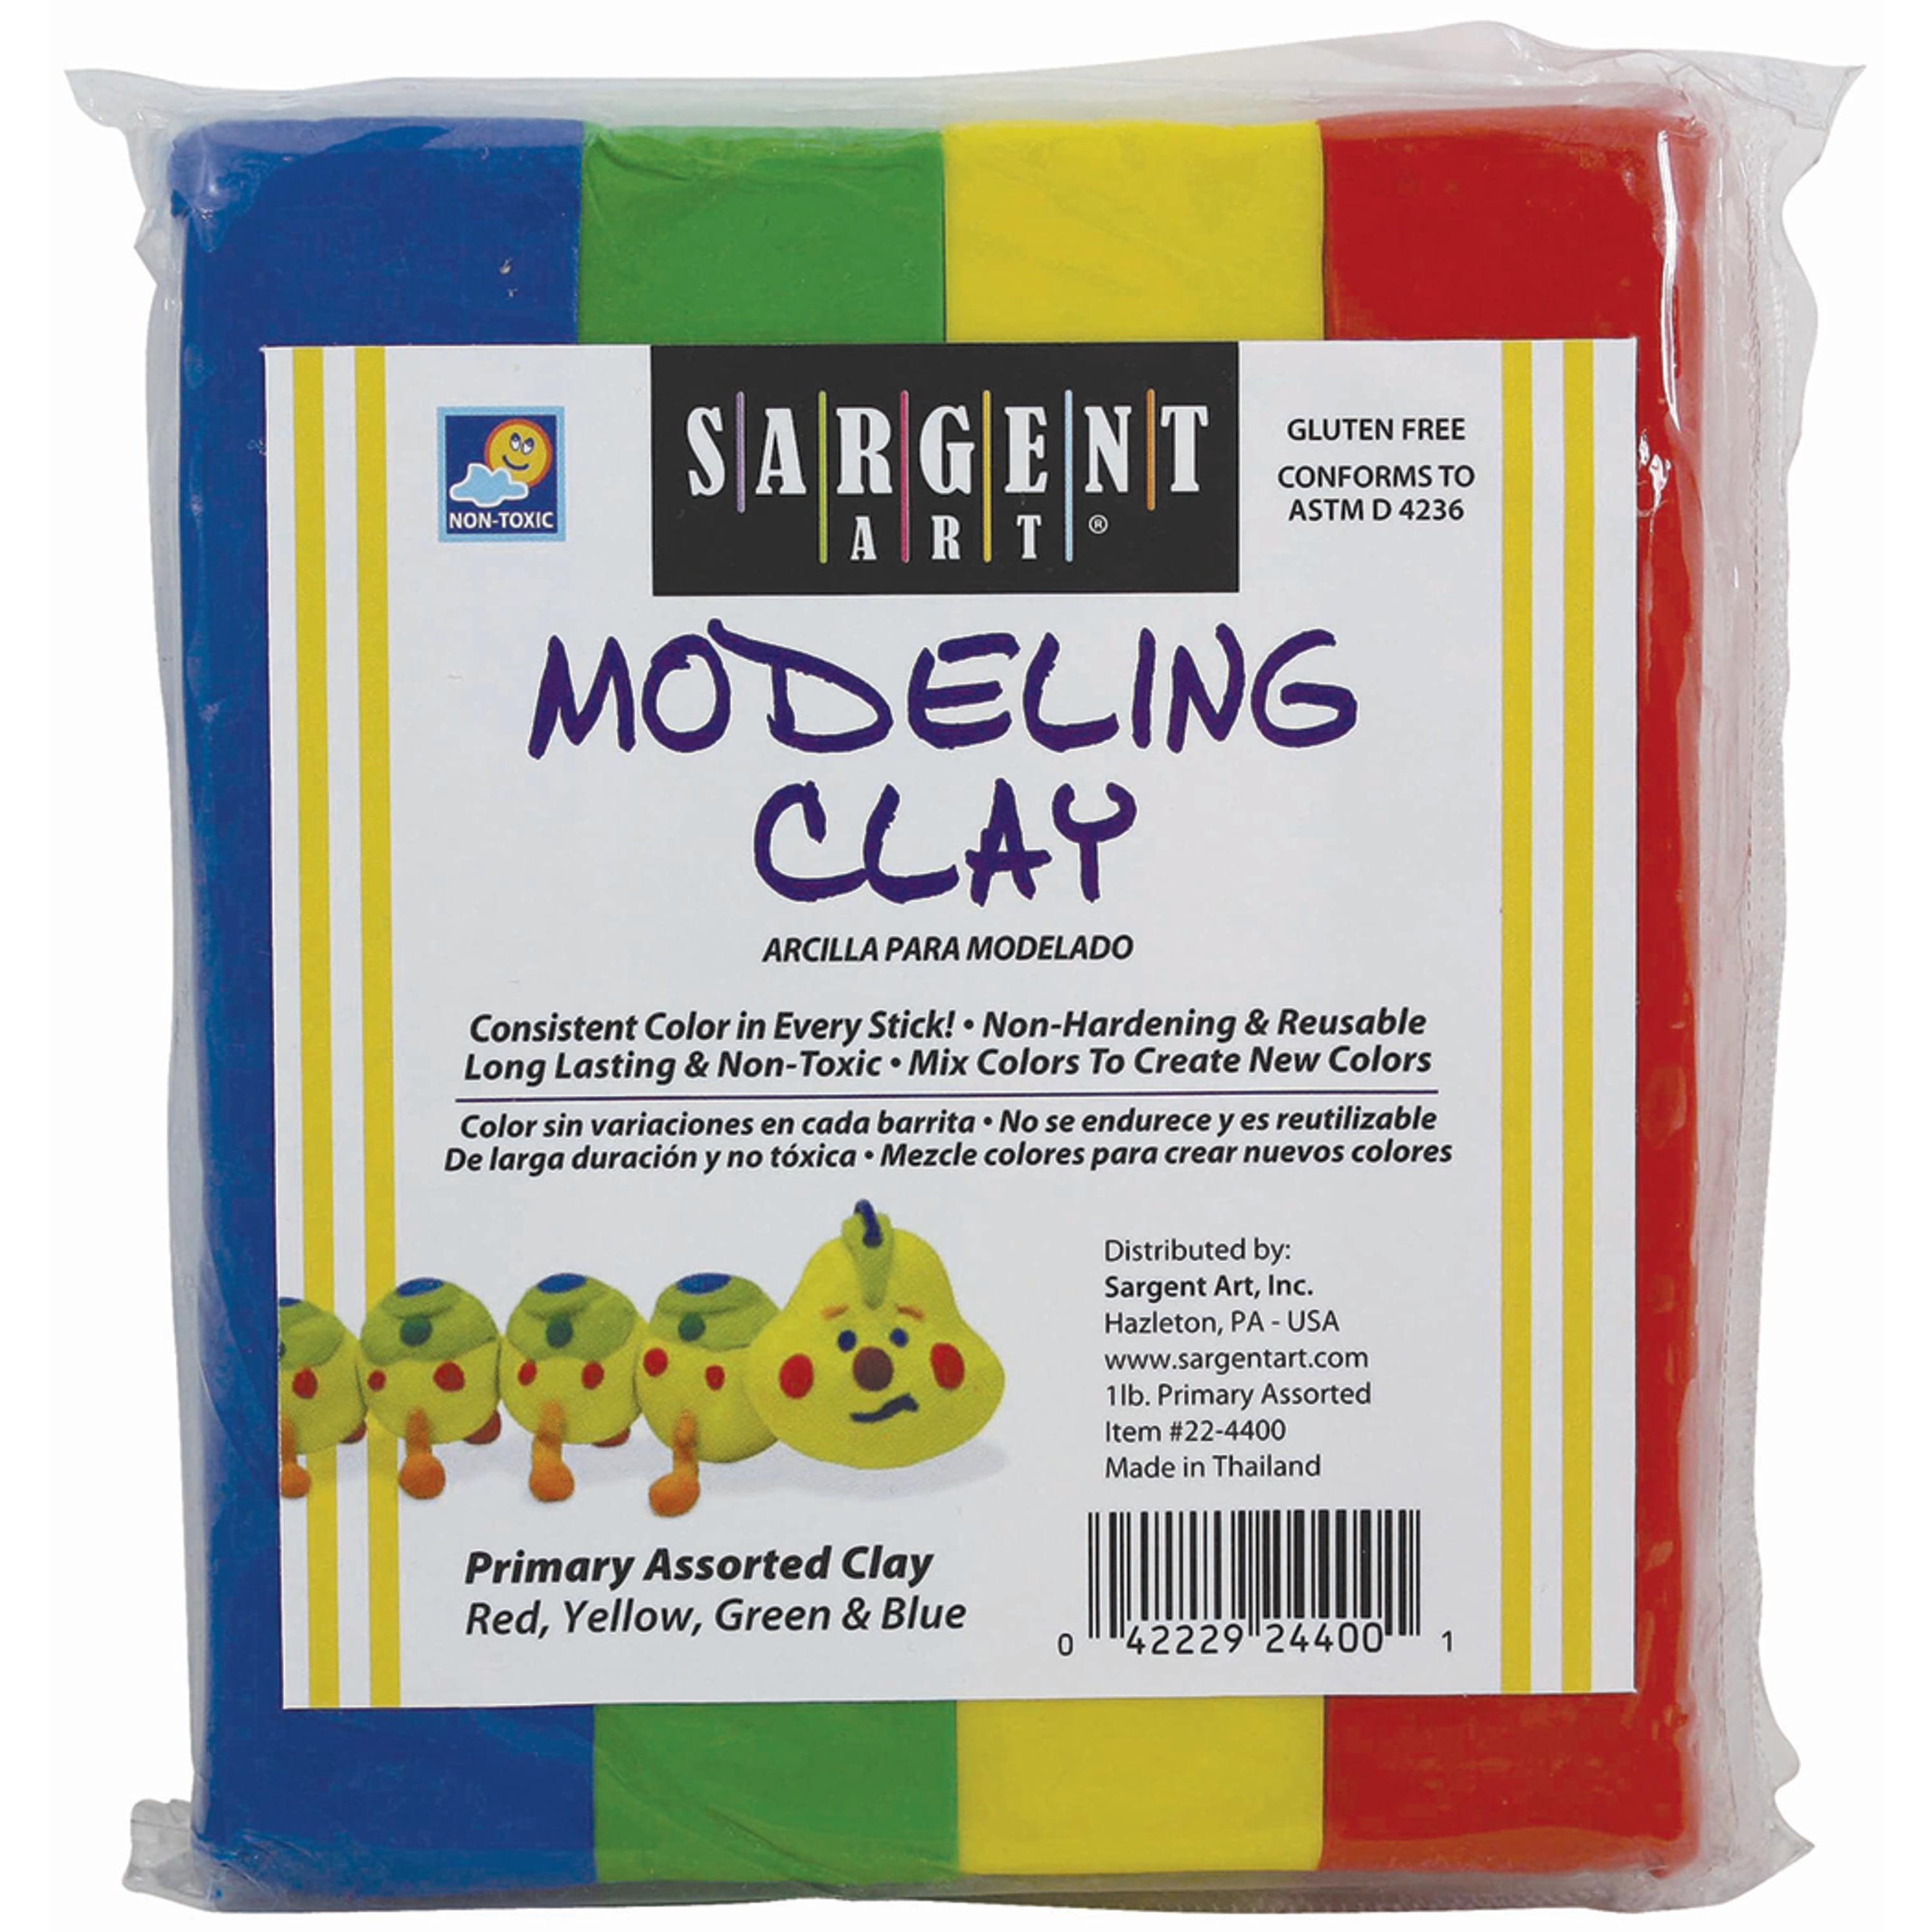 Amaco Permoplast Modeling Clay Re-Usable Oil Based 10 lbs. 